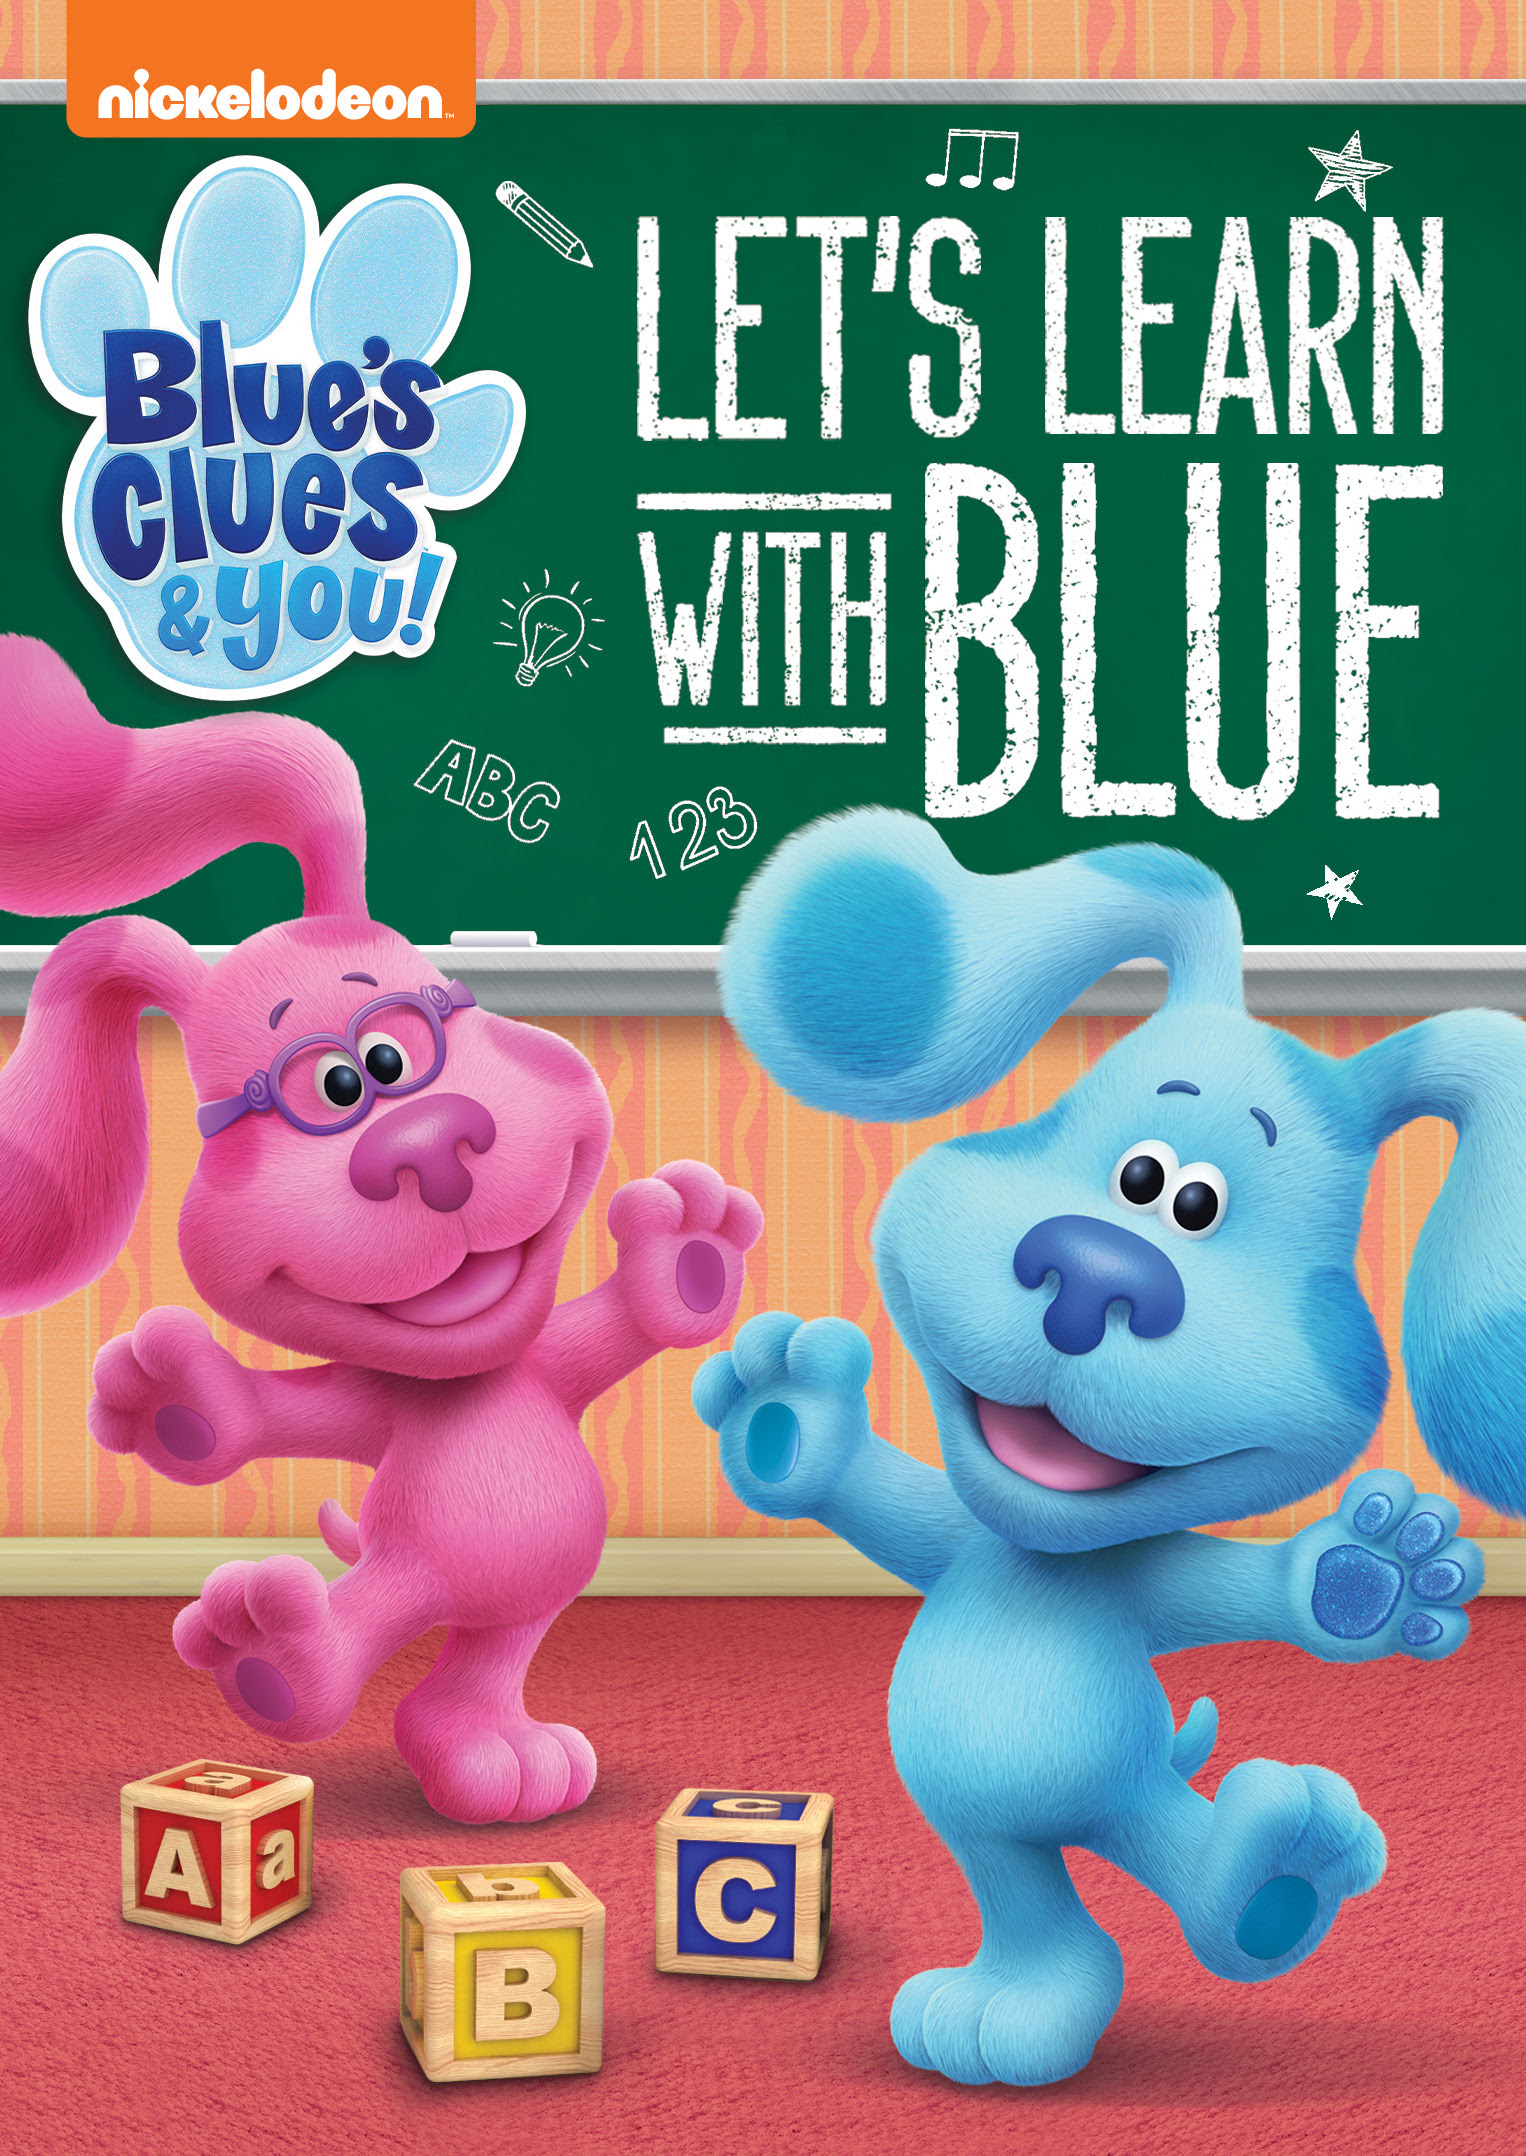 Blue's Clues & You! Let's Learn With Blue